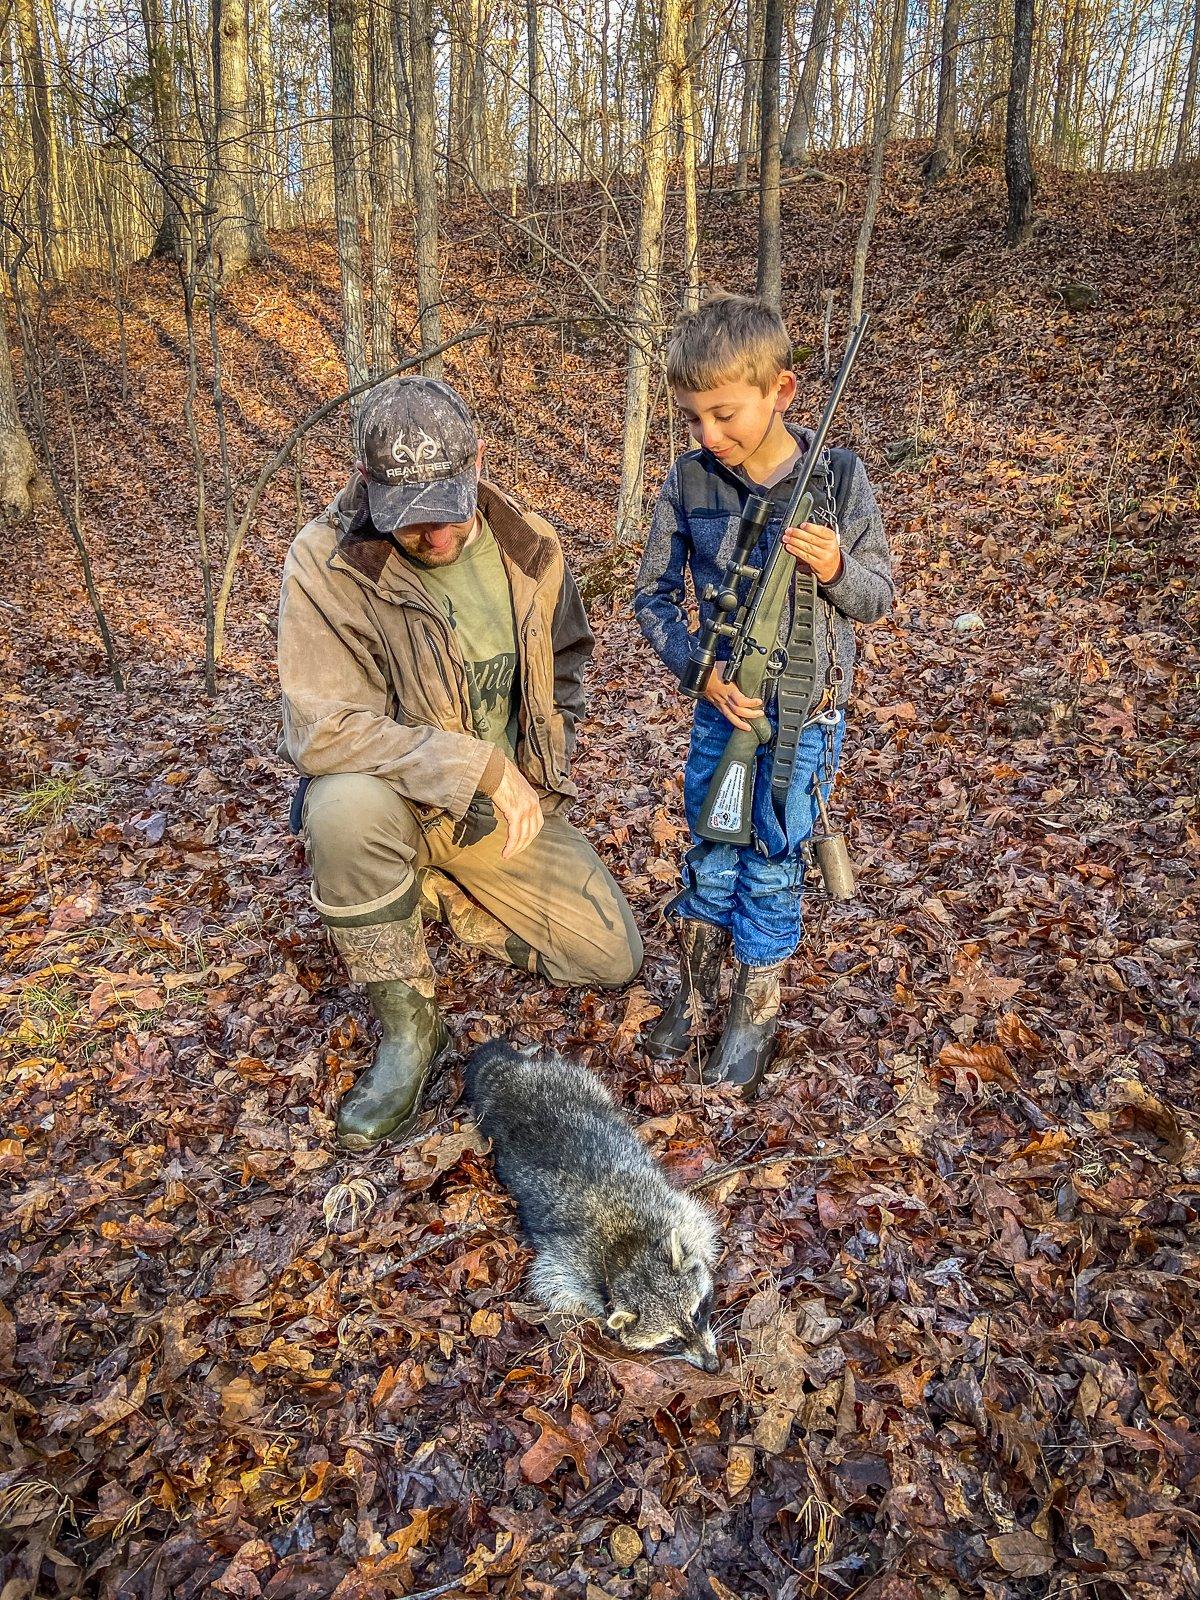 Trapping is a great way to teach woodsmanship to young hunters. Image by Will Brantley